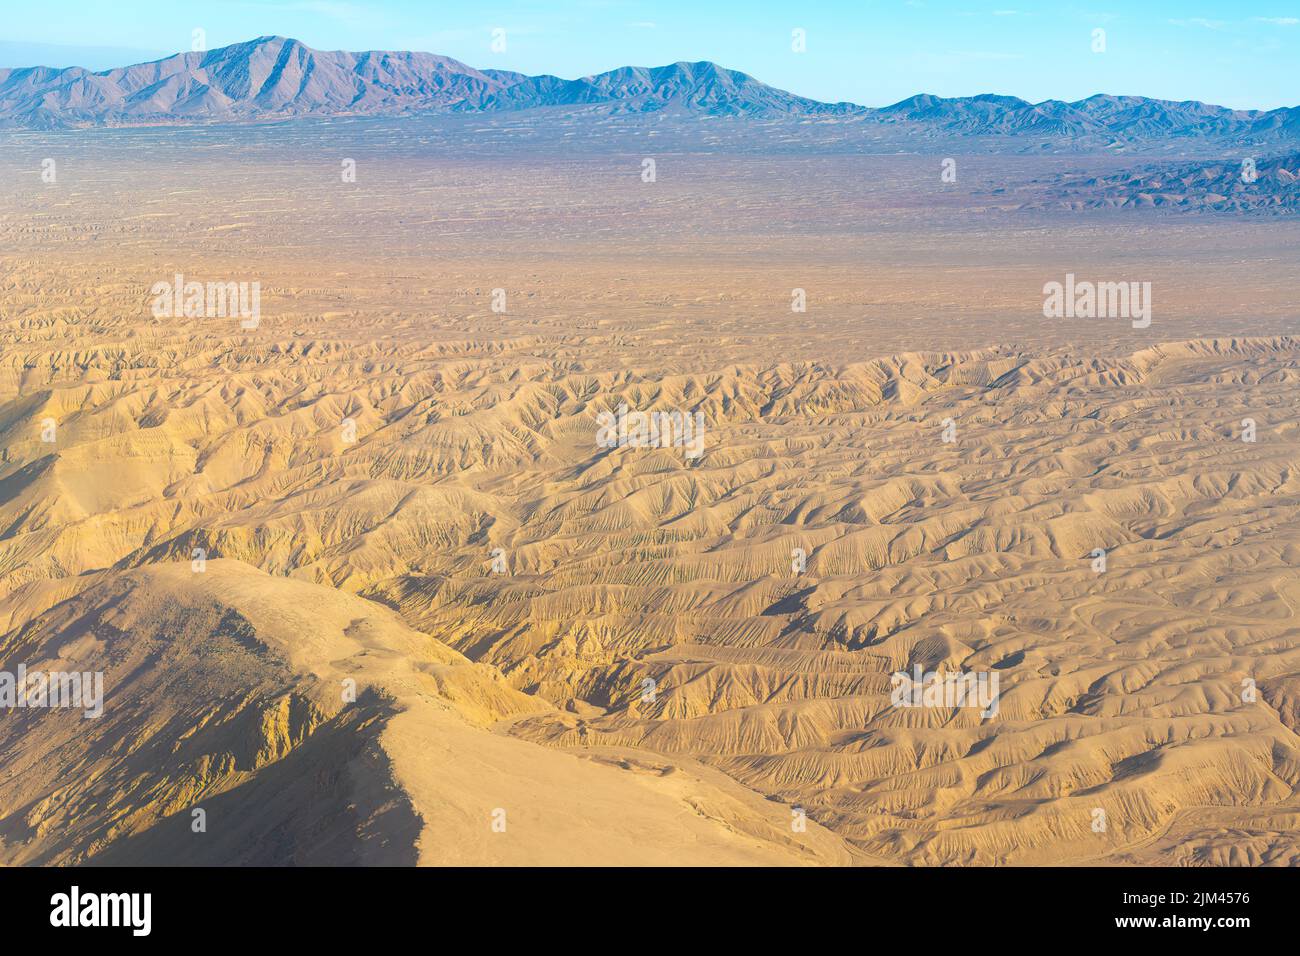 Aerial view of the highlands of the Atacama Desert, Chile Stock Photo